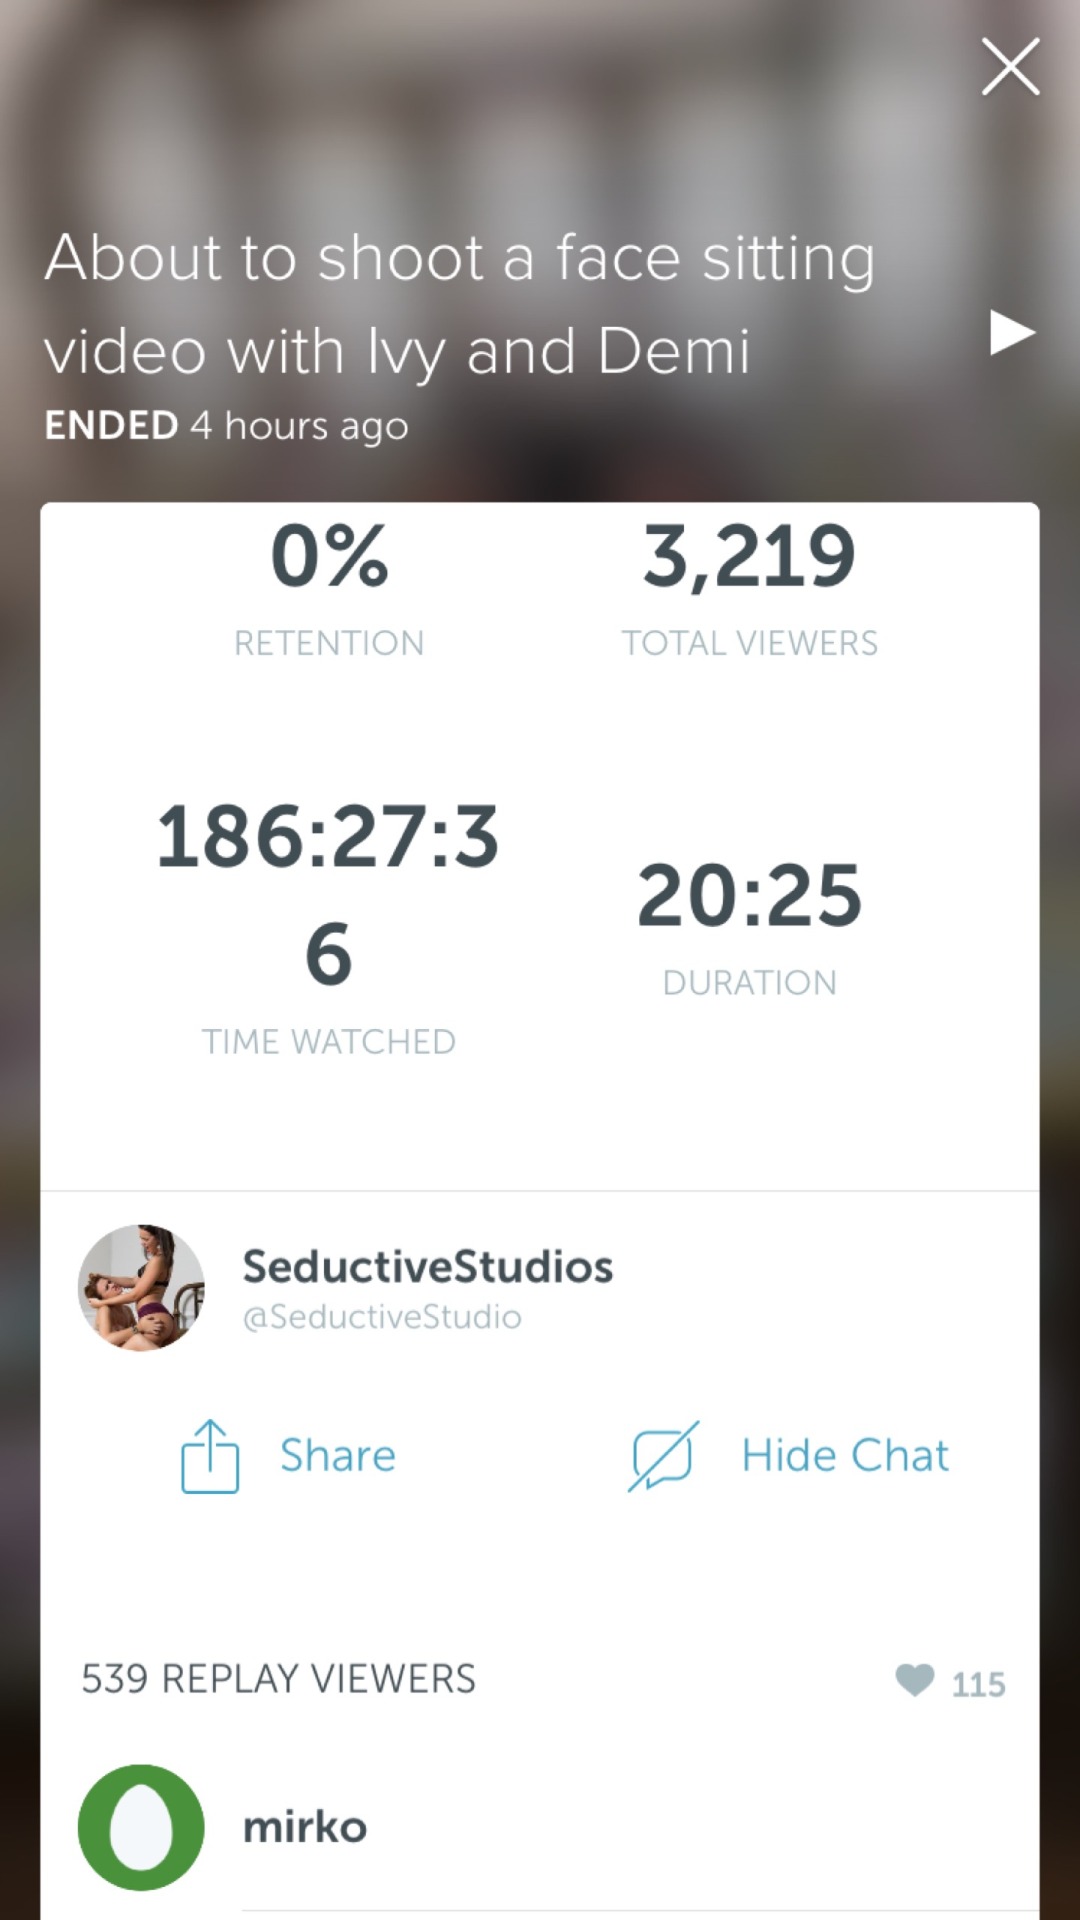 What an awesome periscope session